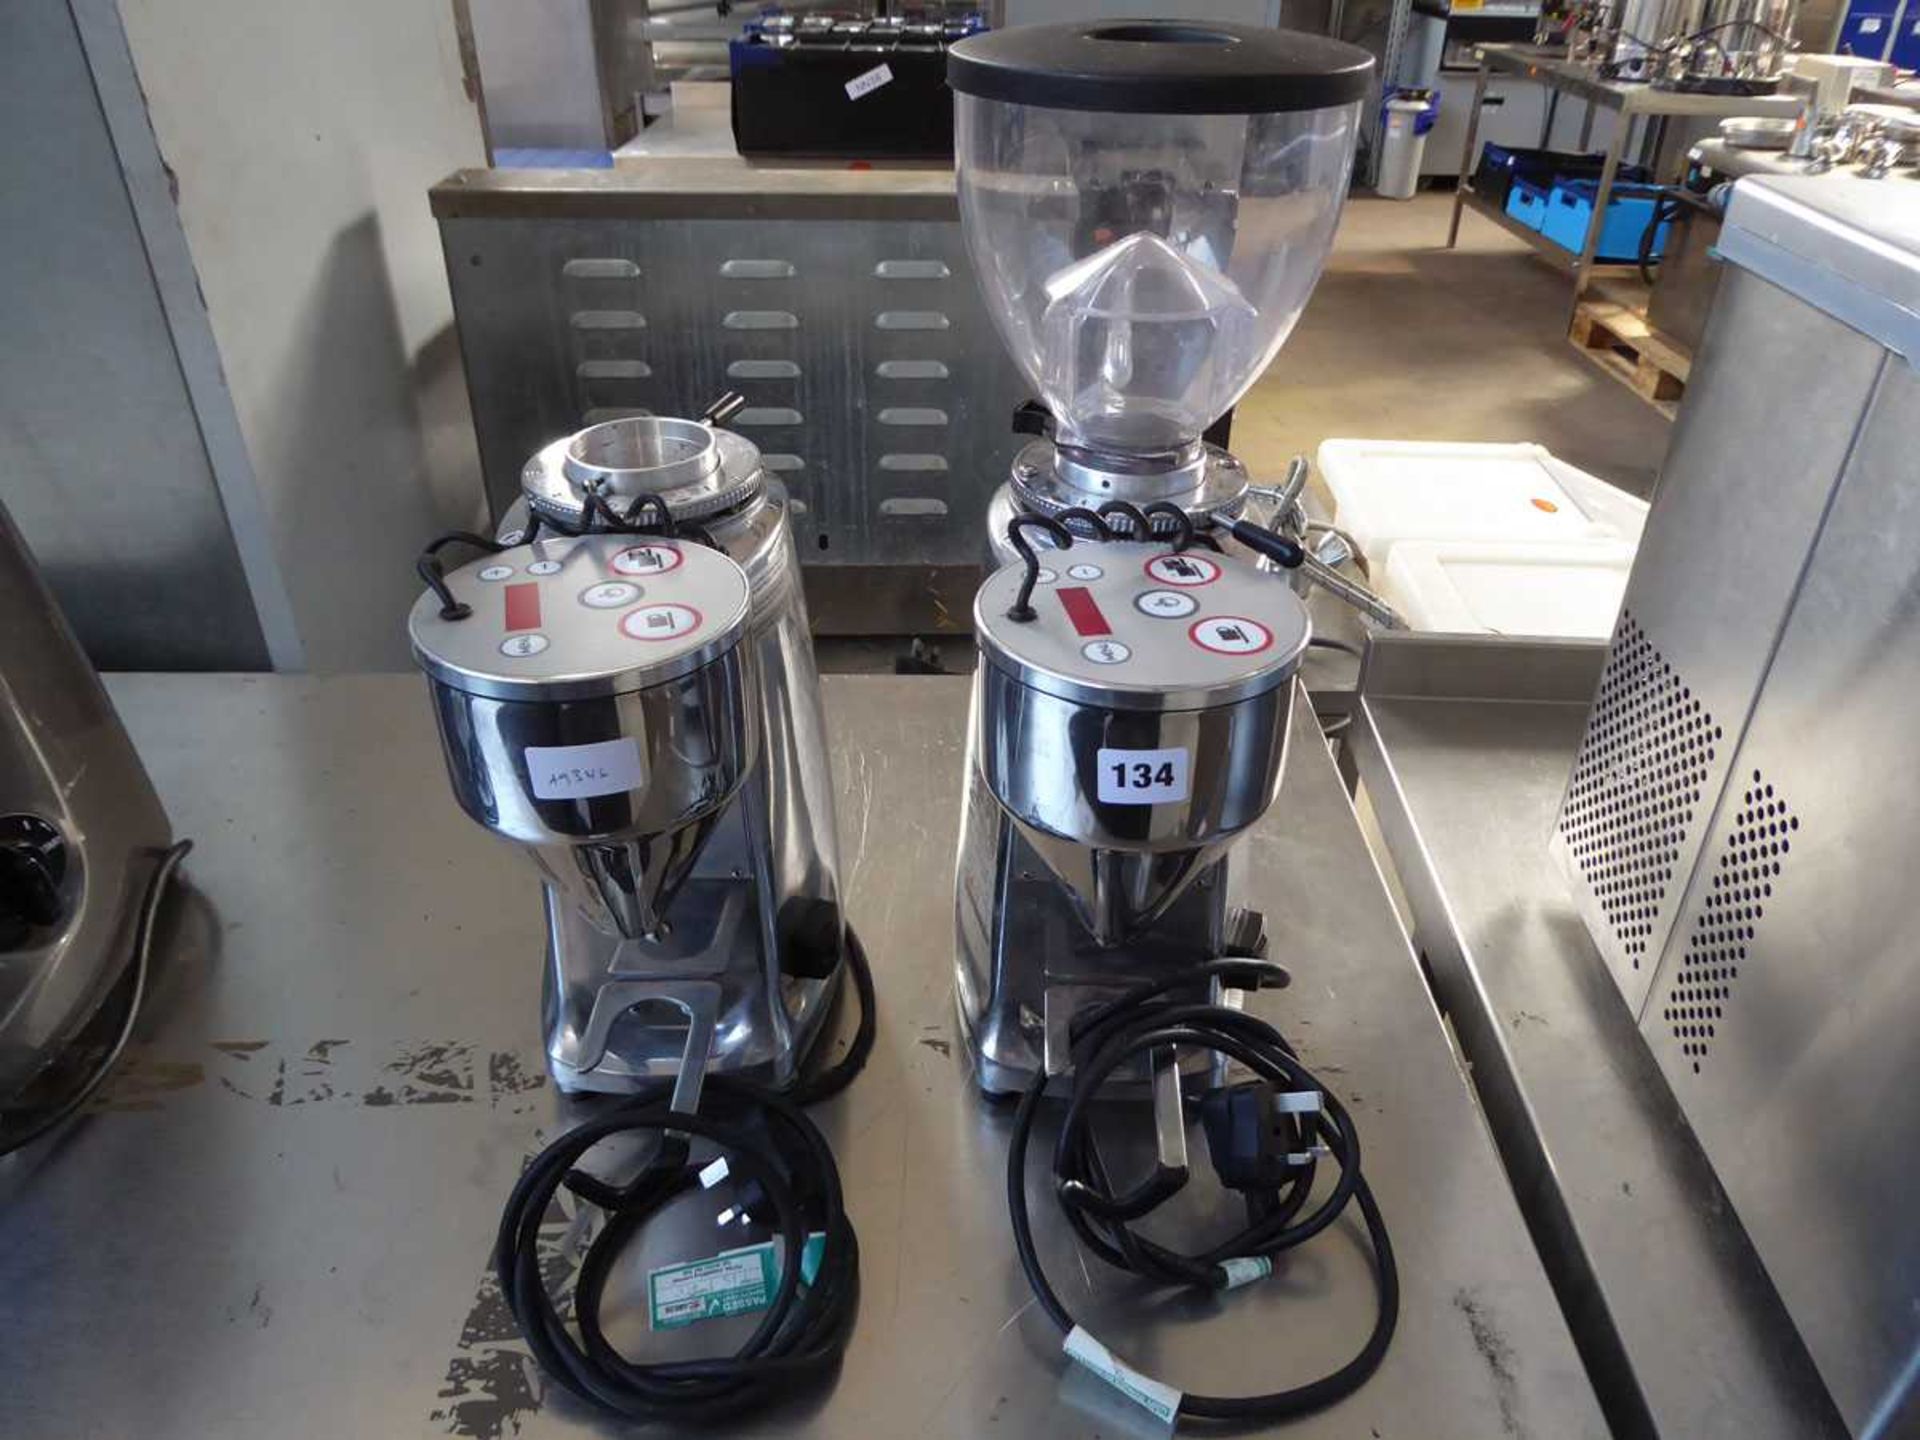 2 Mazzer model mini electronic coffee grinders, 1 with hopper